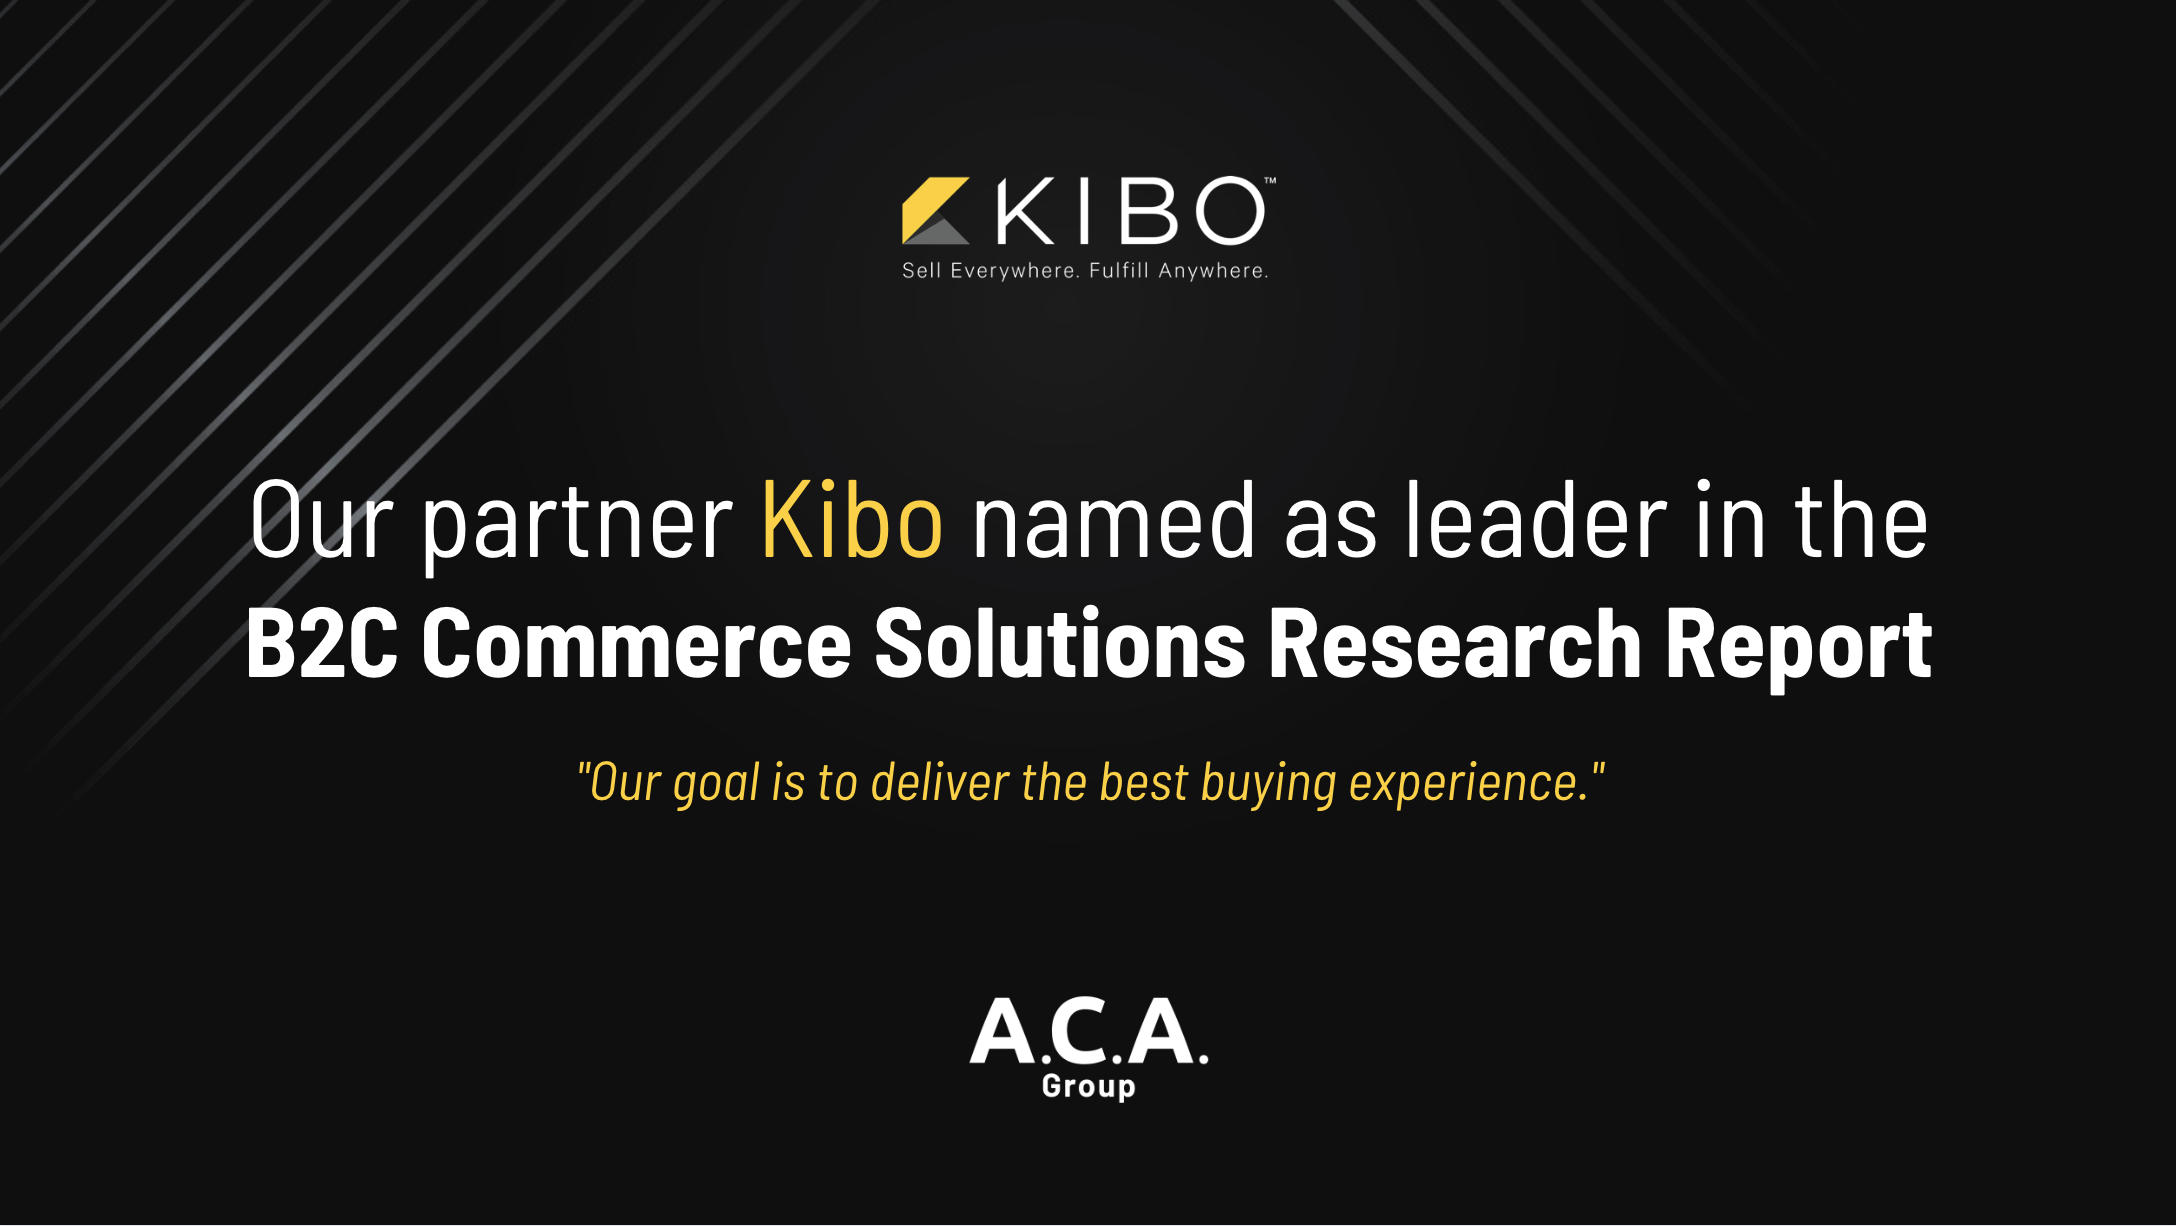 ACA partner Kibo named as leader in the B2C Commerce Solutions Research Report